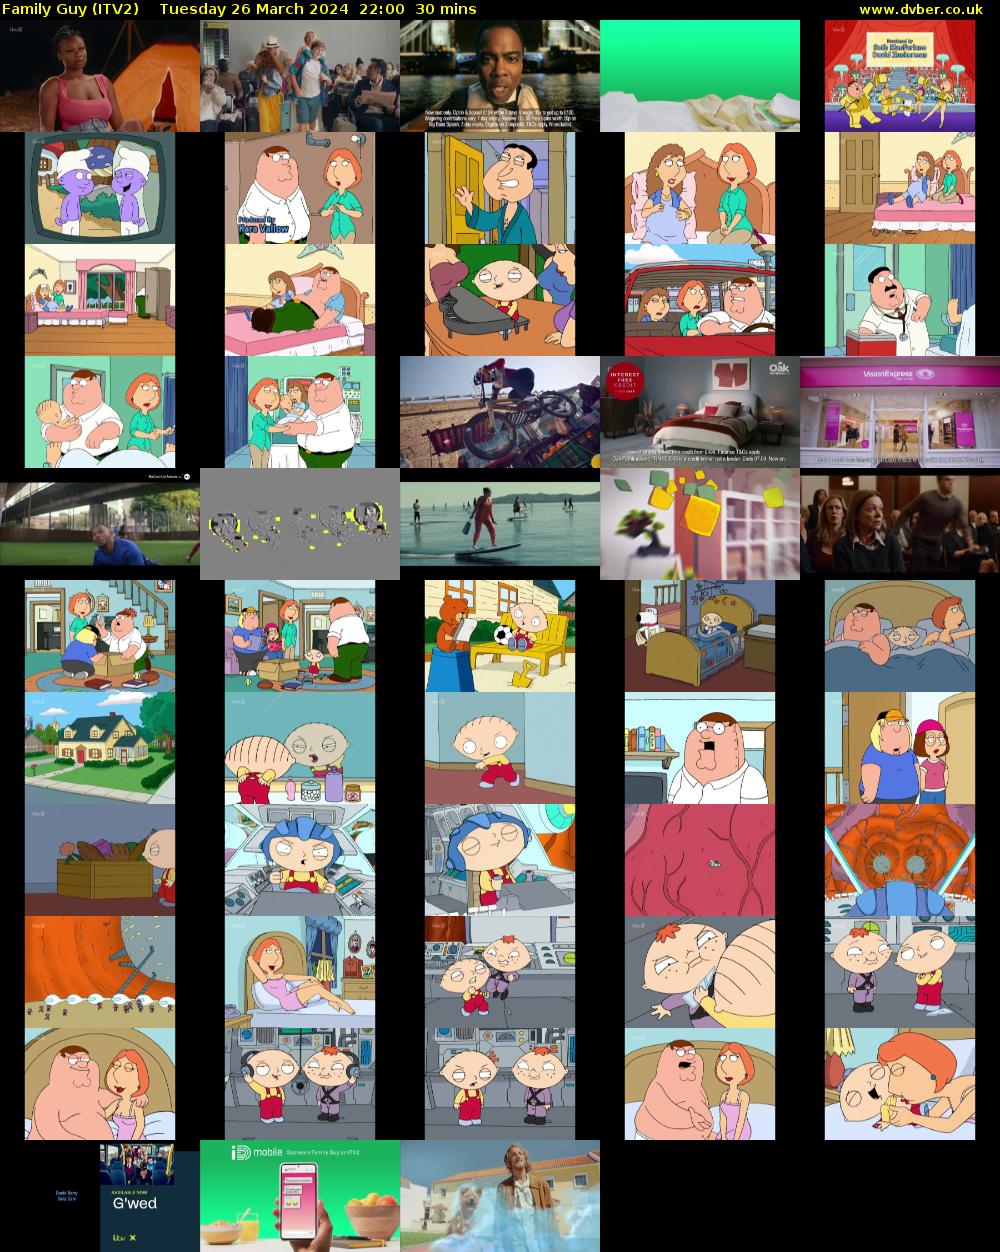 Family Guy (ITV2) Tuesday 26 March 2024 22:00 - 22:30